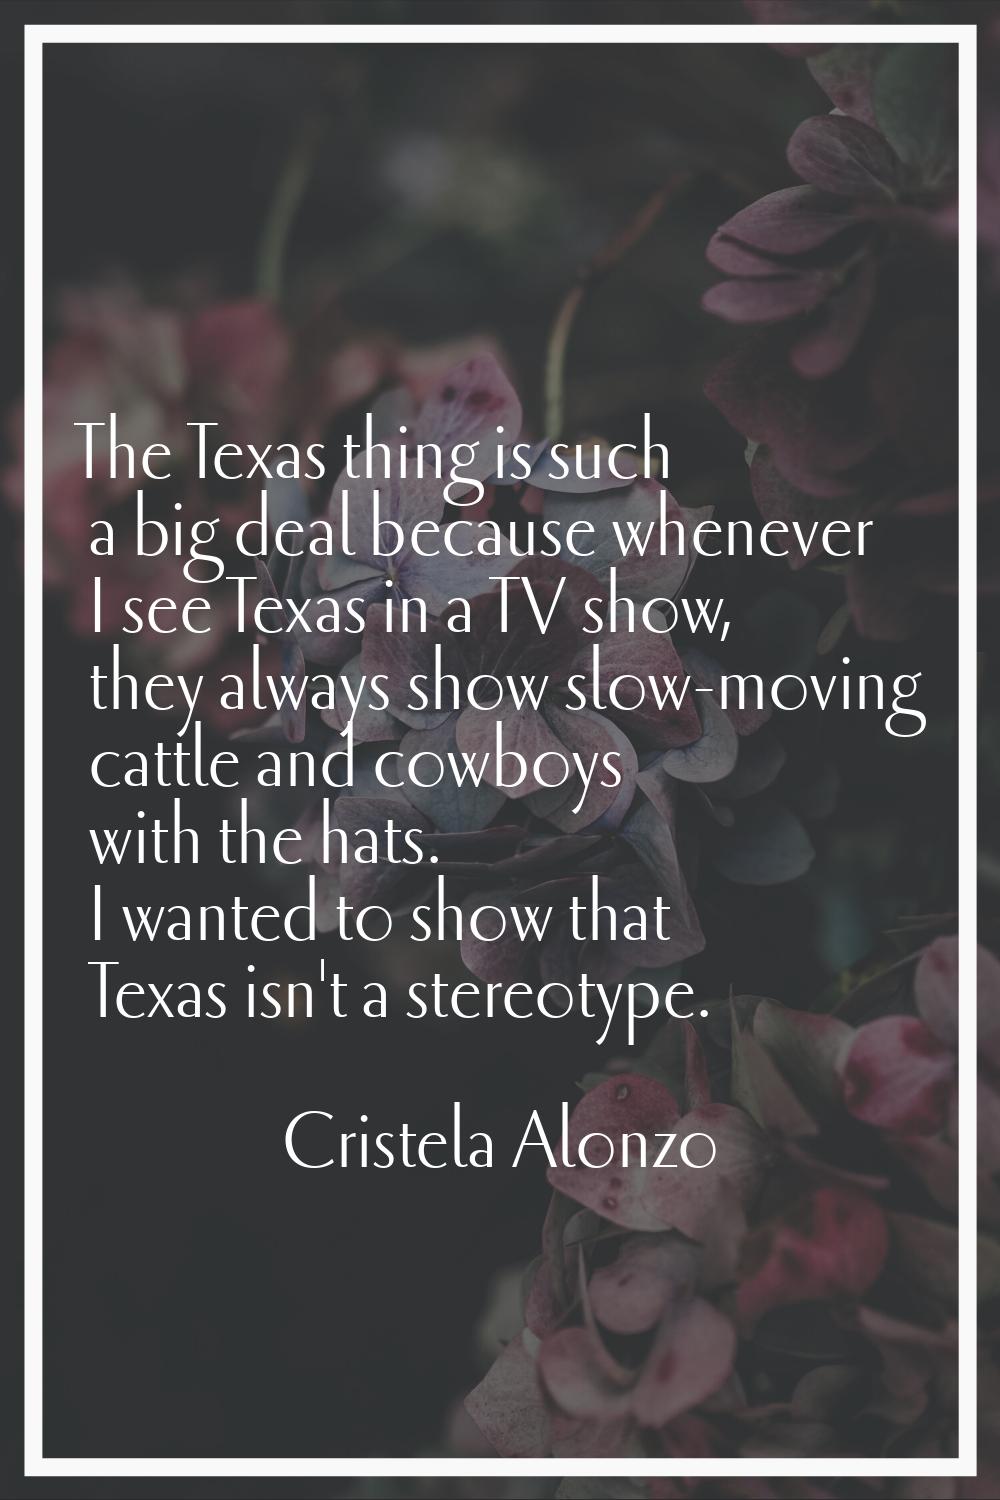 The Texas thing is such a big deal because whenever I see Texas in a TV show, they always show slow